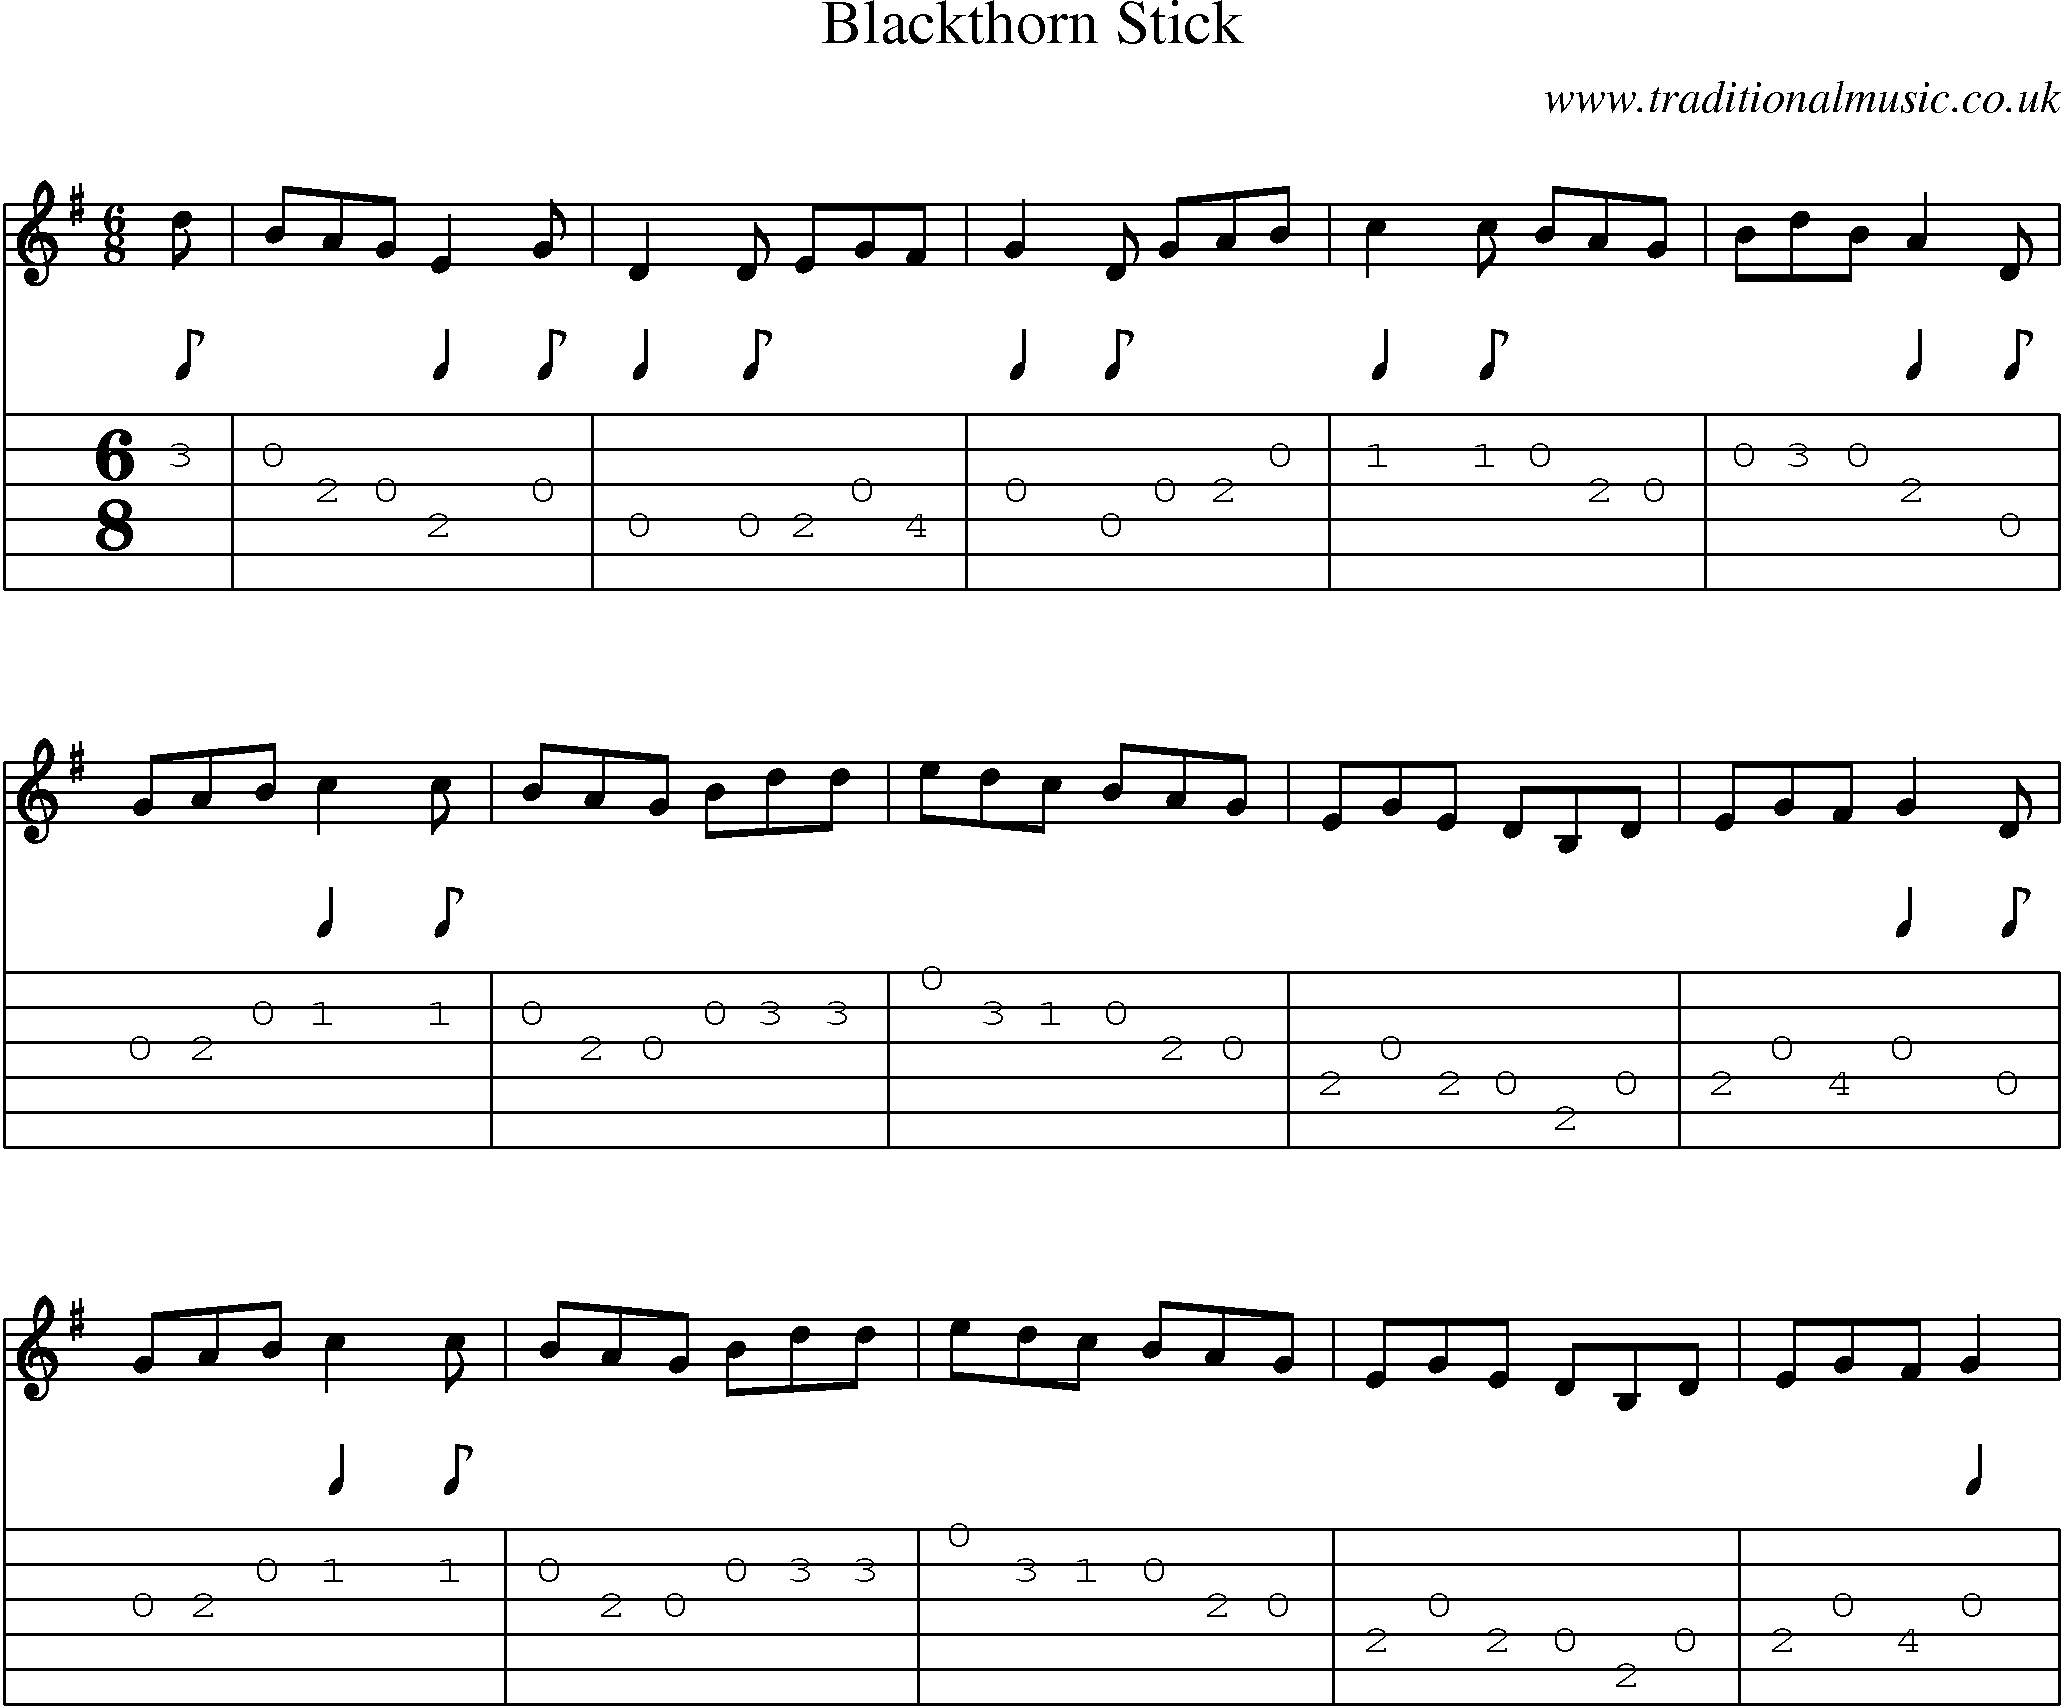 Music Score and Guitar Tabs for Blackthorn Stick